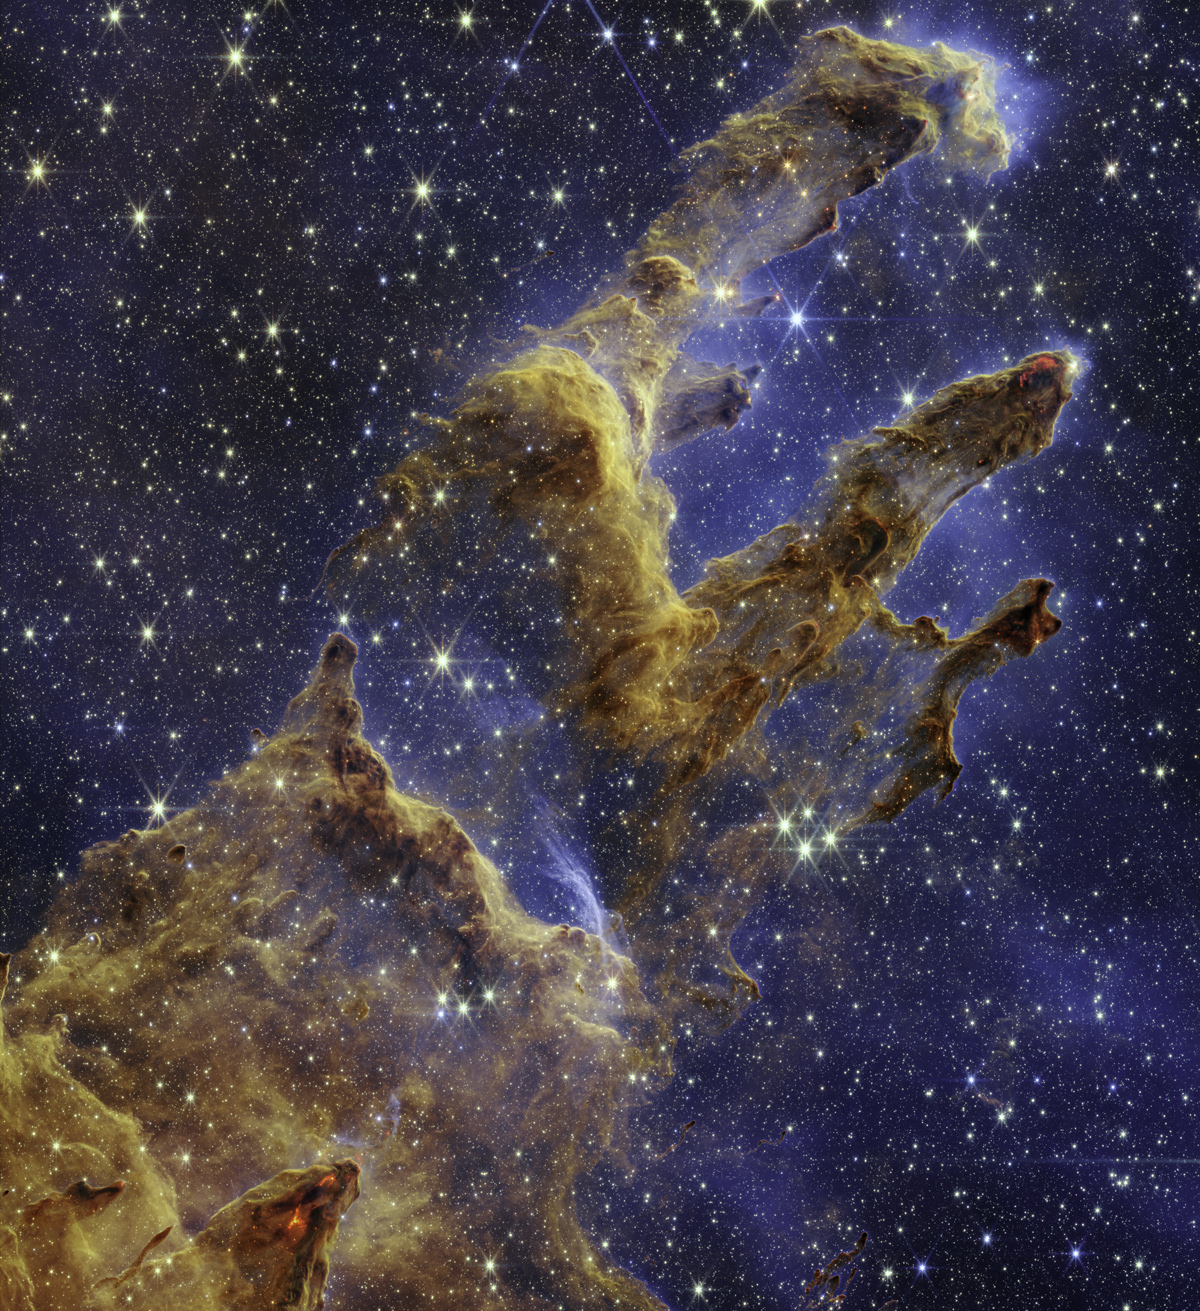 The Pillars of Creation seen by the James Webb Space Telescope.